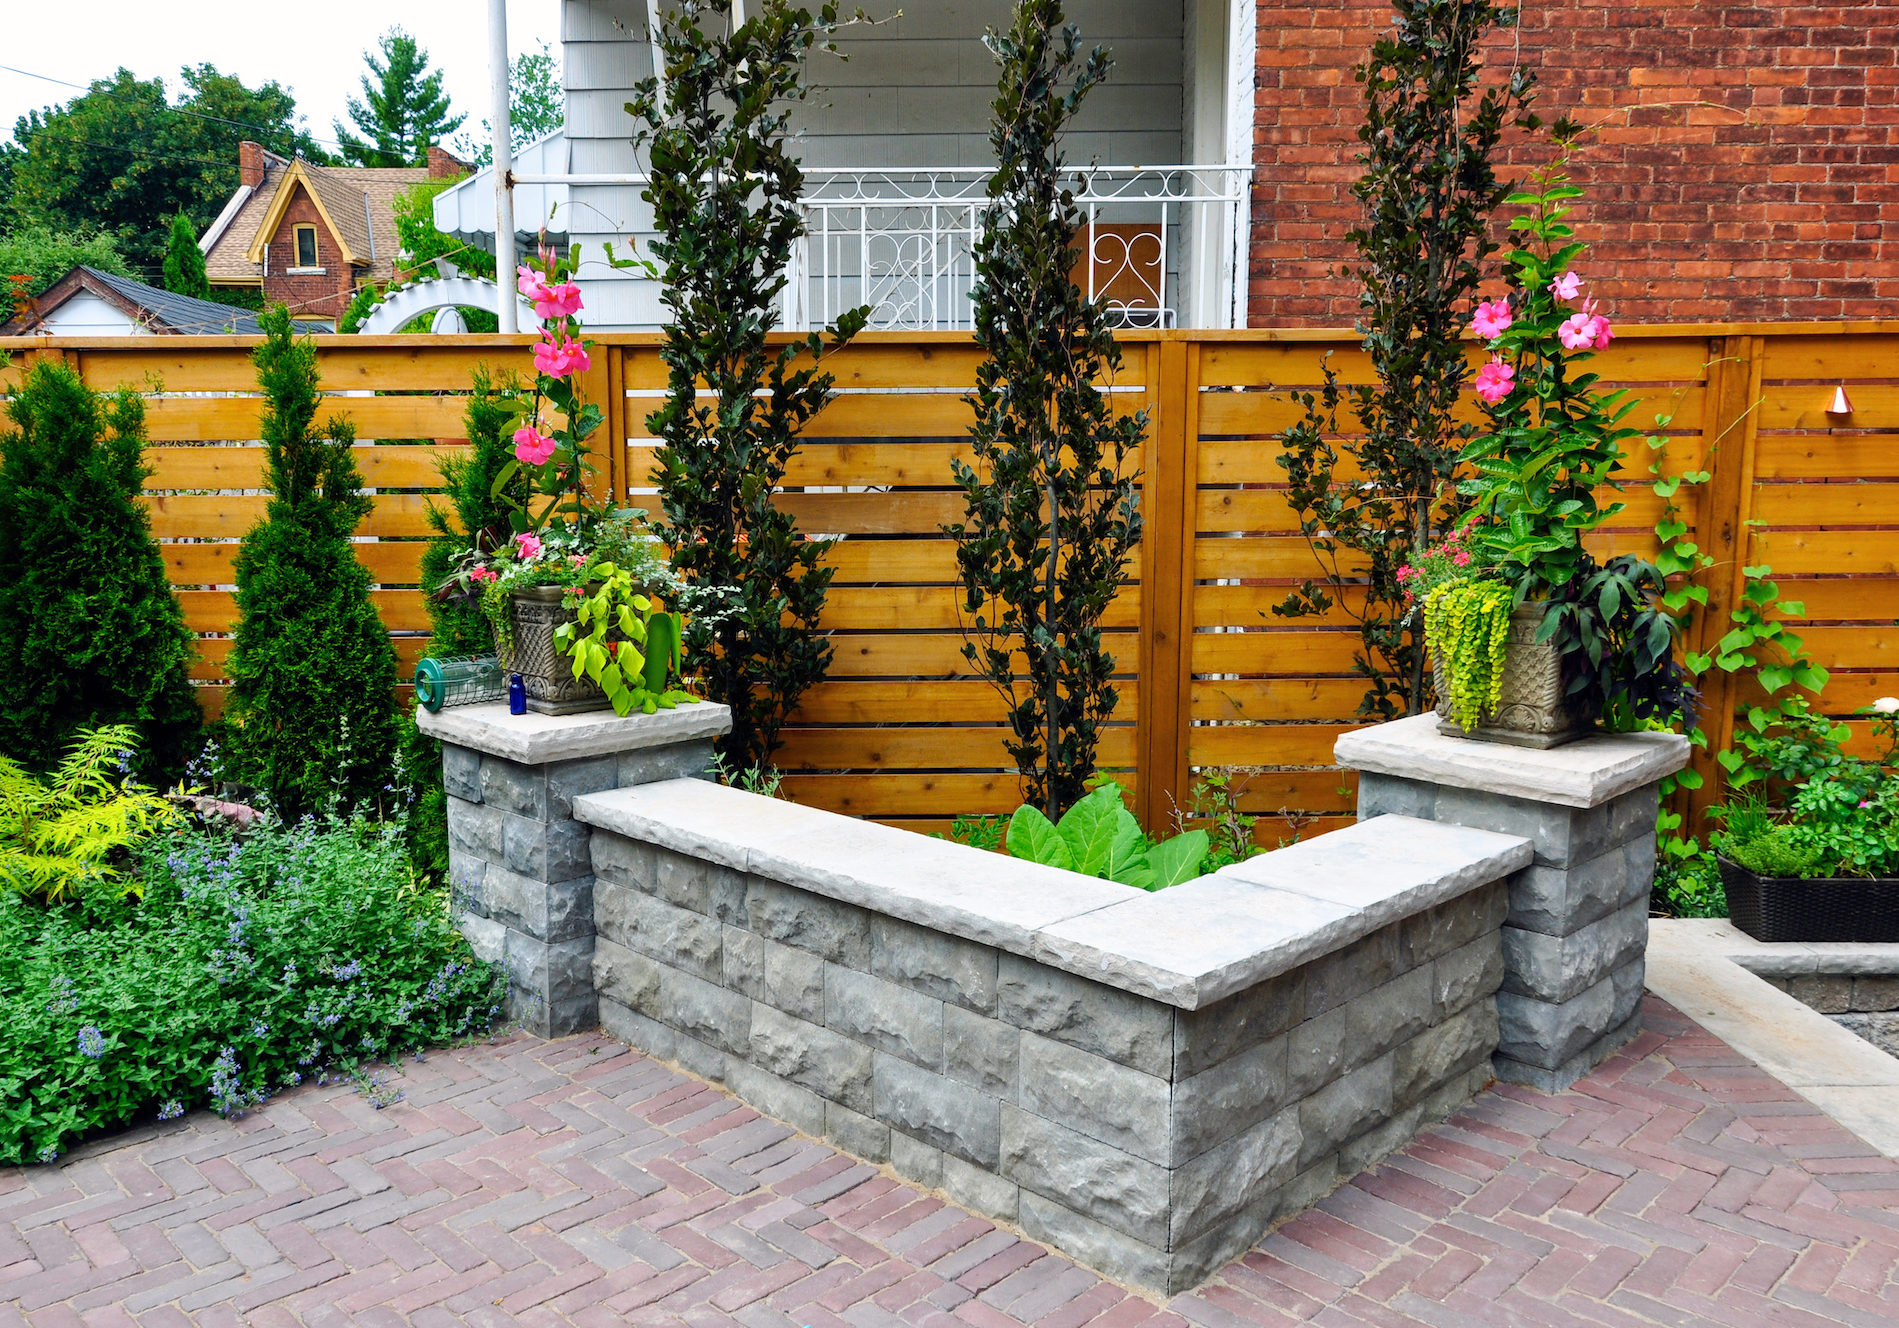 A retaining wall with natural stone coping and pillars added additional seating for entertaining in a small urban backyard garden